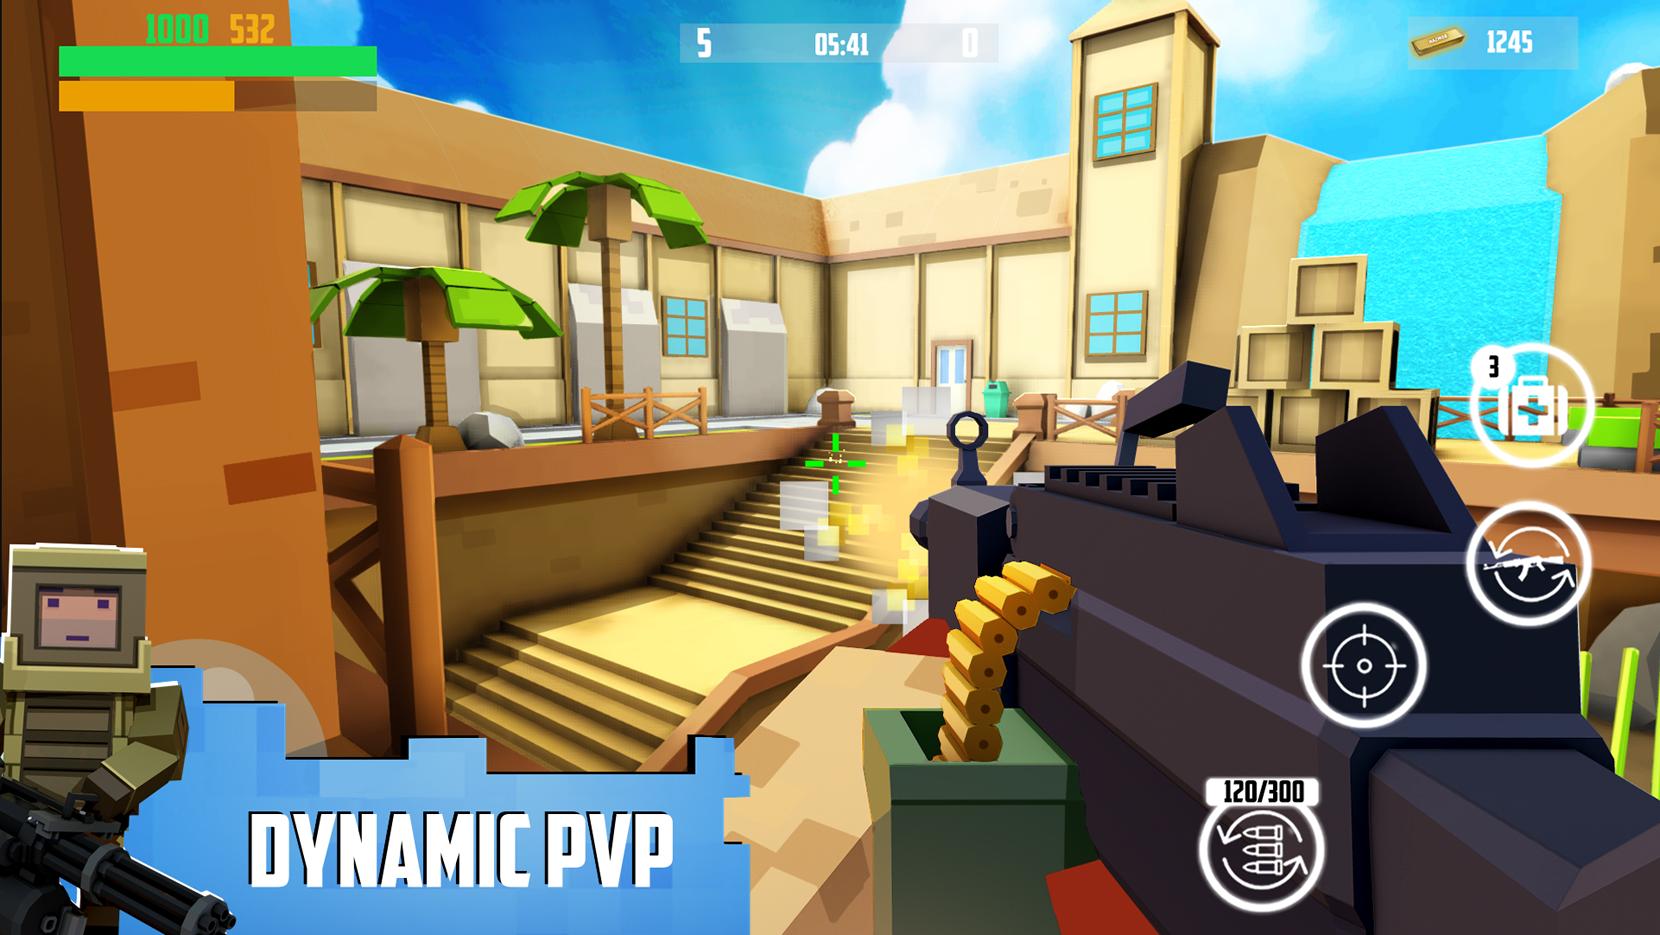 Hazmob FPS : Online multiplayer fps shooting game Download APK for Android ( Free)